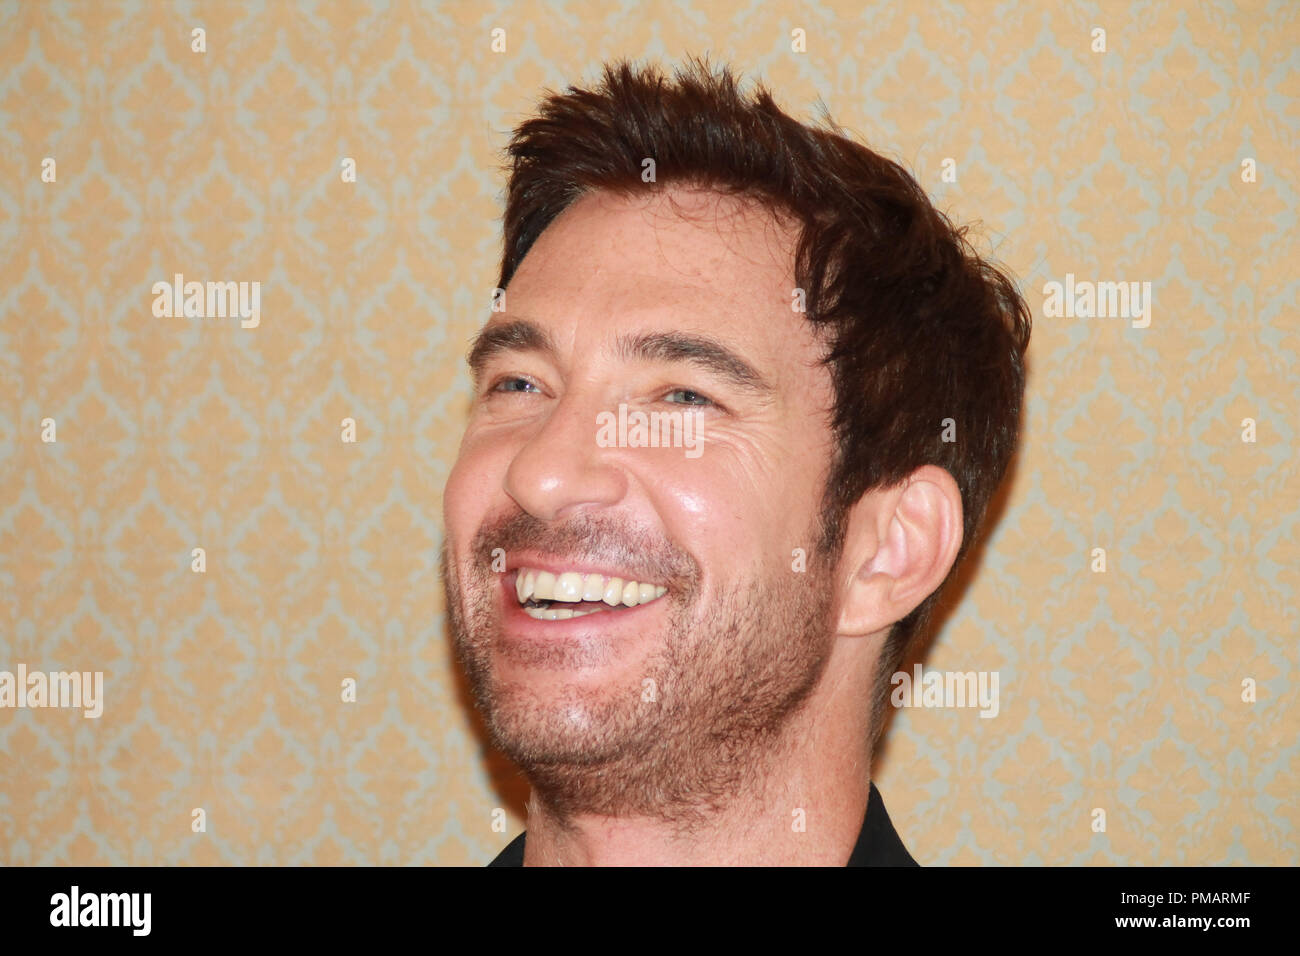 Dylan McDermott  'Hostages' TV Series Portrait Session, July 30, 2013. Reproduction by American tabloids is absolutely forbidden. File Reference # 32073 011JRC  For Editorial Use Only -  All Rights Reserved Stock Photo